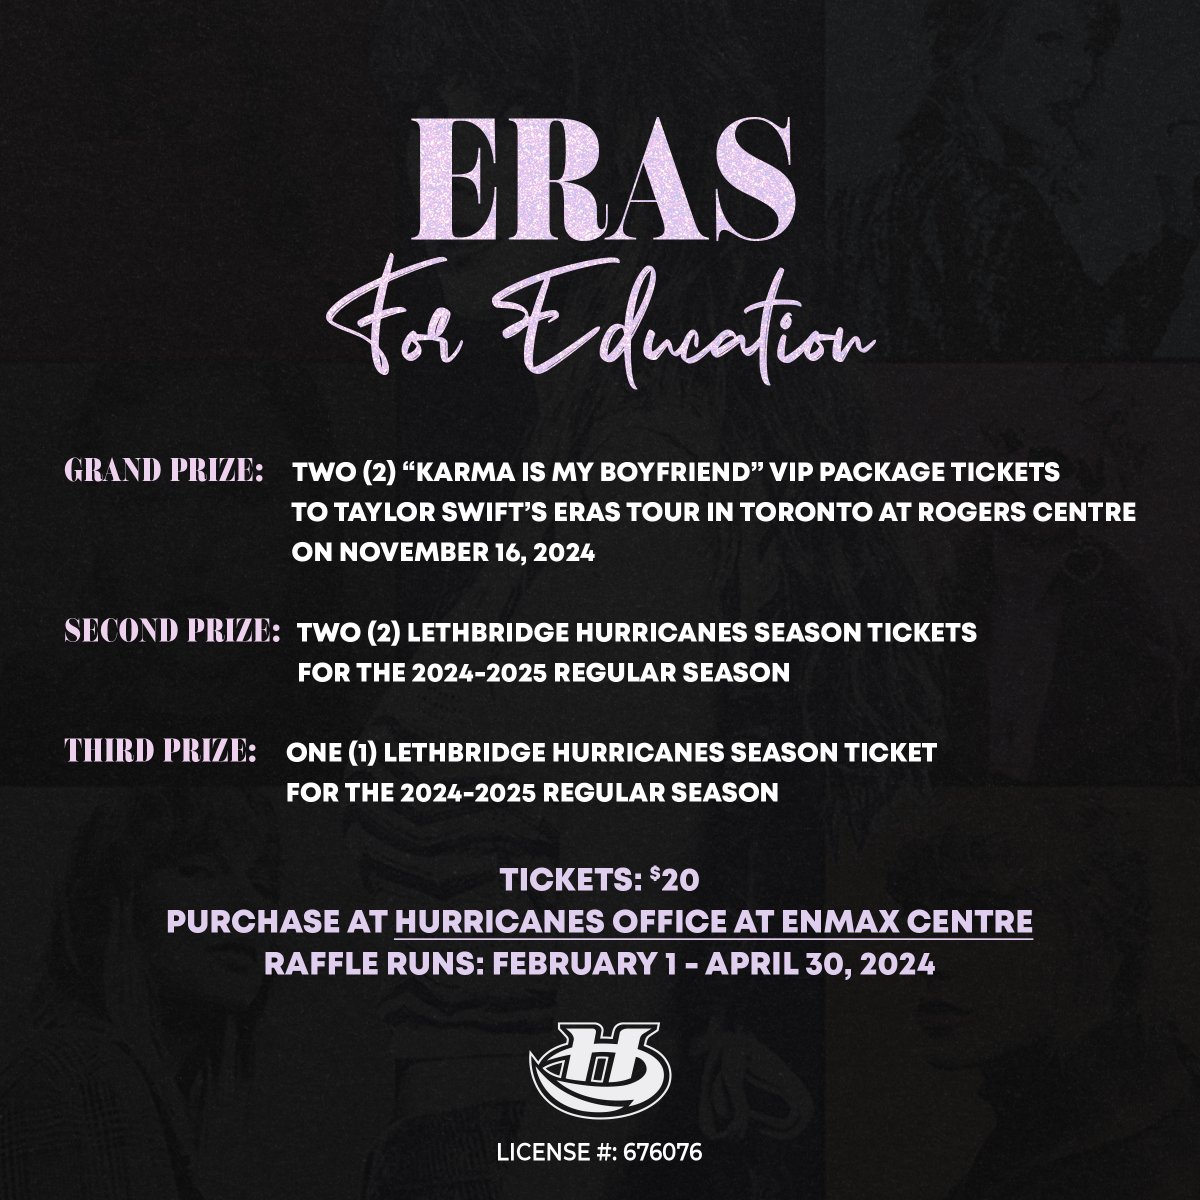 Just 2 more weeks and less than 100 tickets left for our Eras for Education Raffle! Tickets are just $20 - stop by the #WHLCanes office or give us a call at 403-328-1986 to buy your tickets! #ErasTour